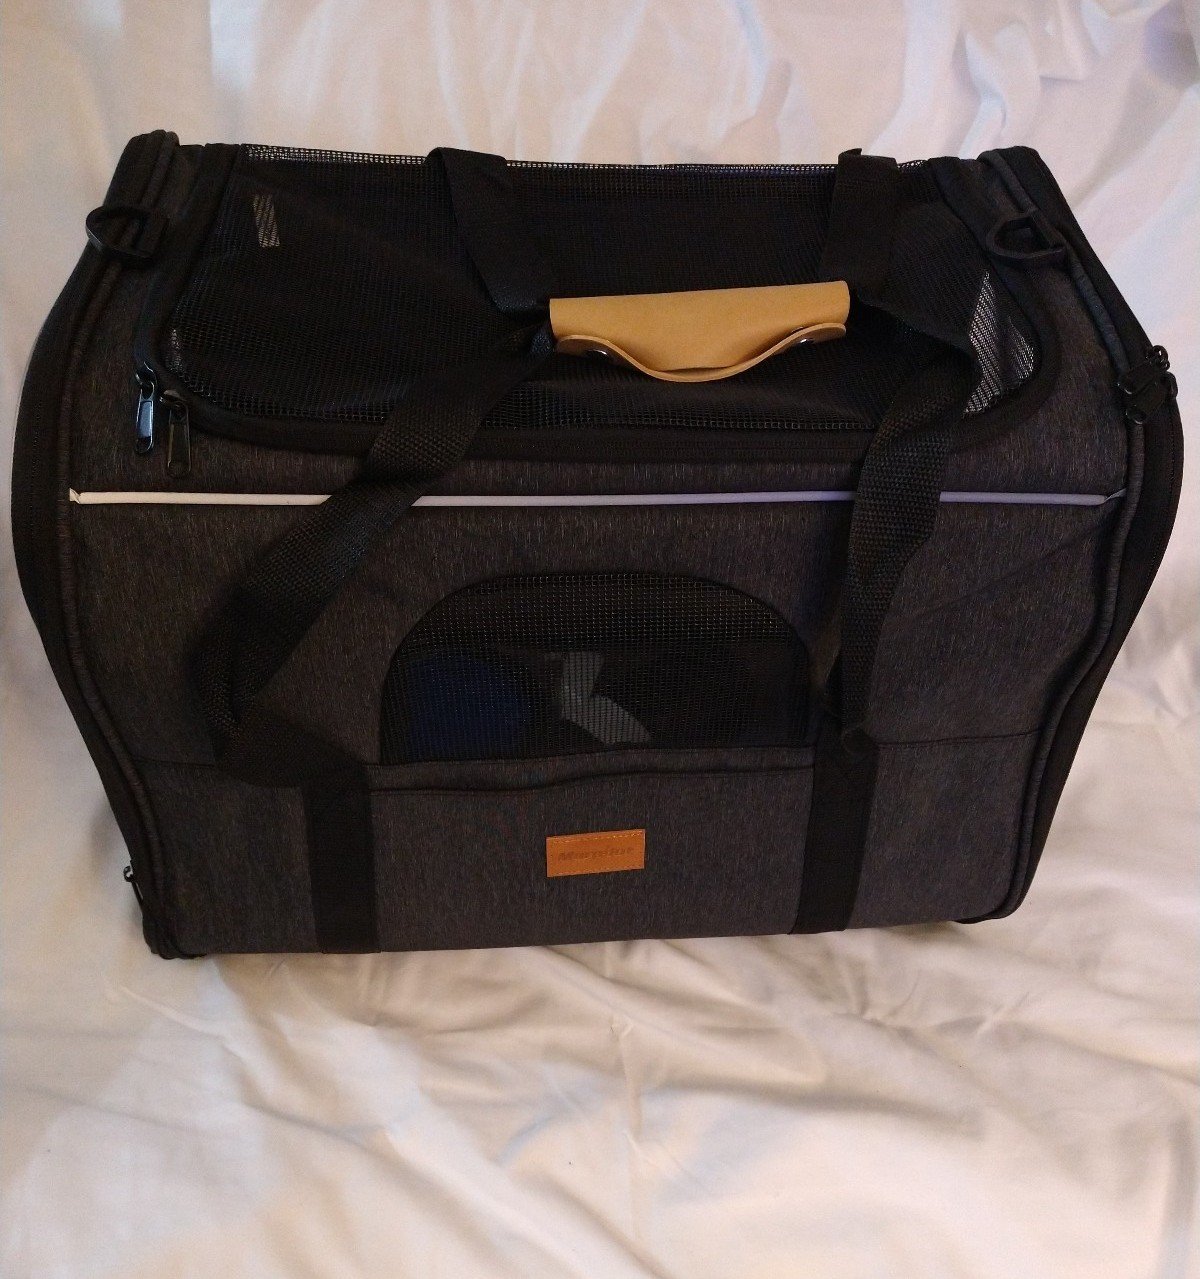 New Pet Travel  Carrier w/ Bed +.Bowl C9gXZdKFn